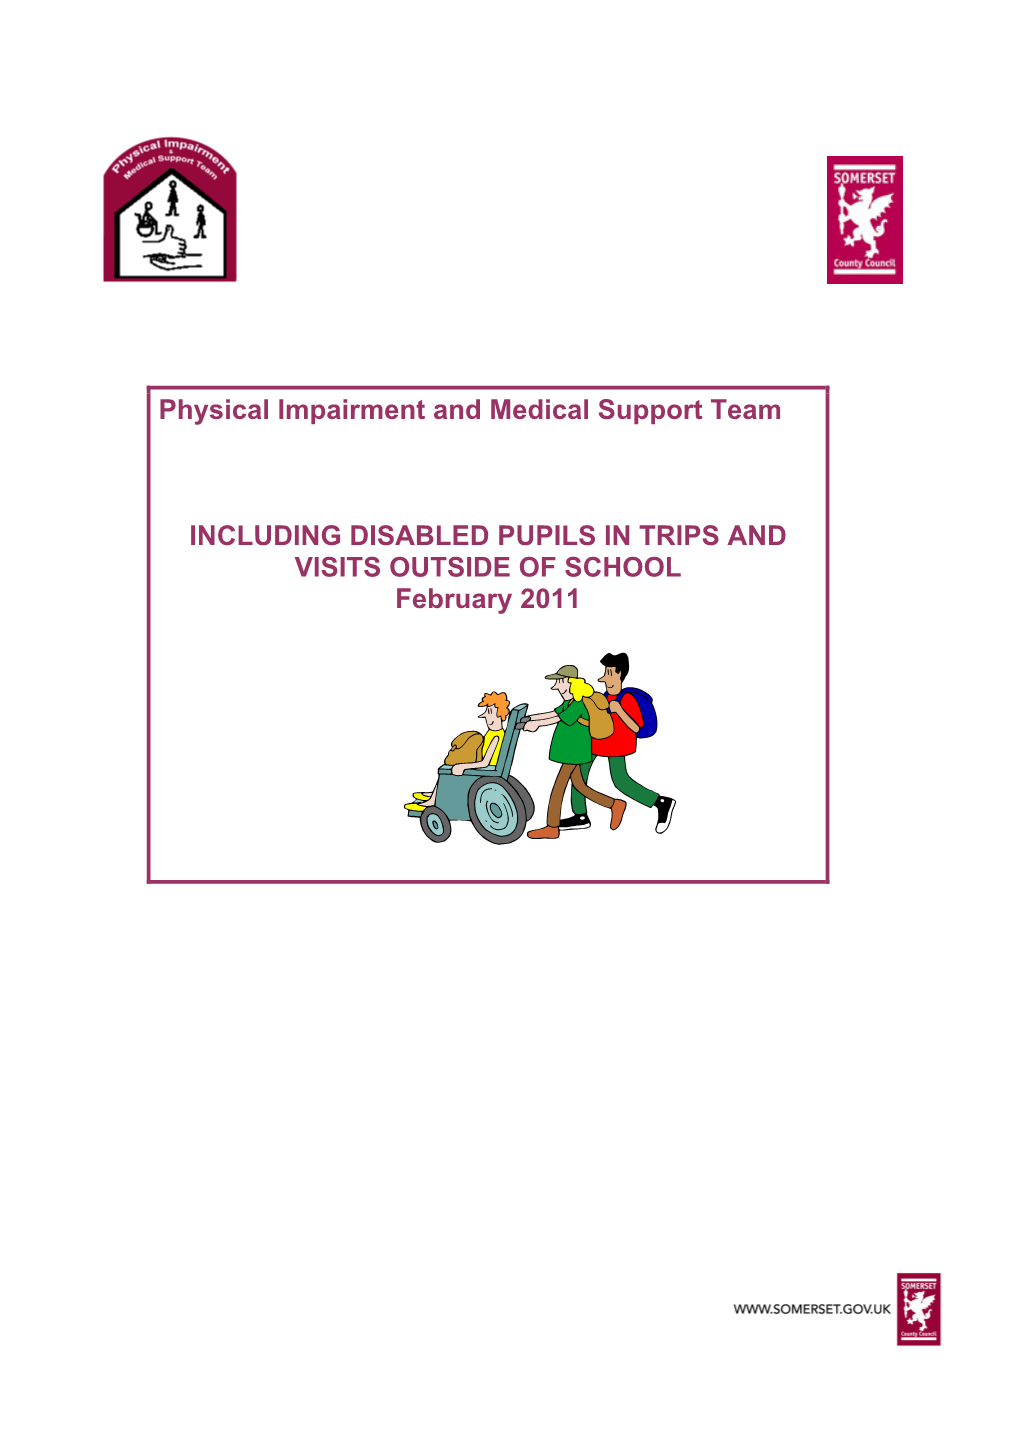 Physical Impairment and Medical Support Team INCLUDING